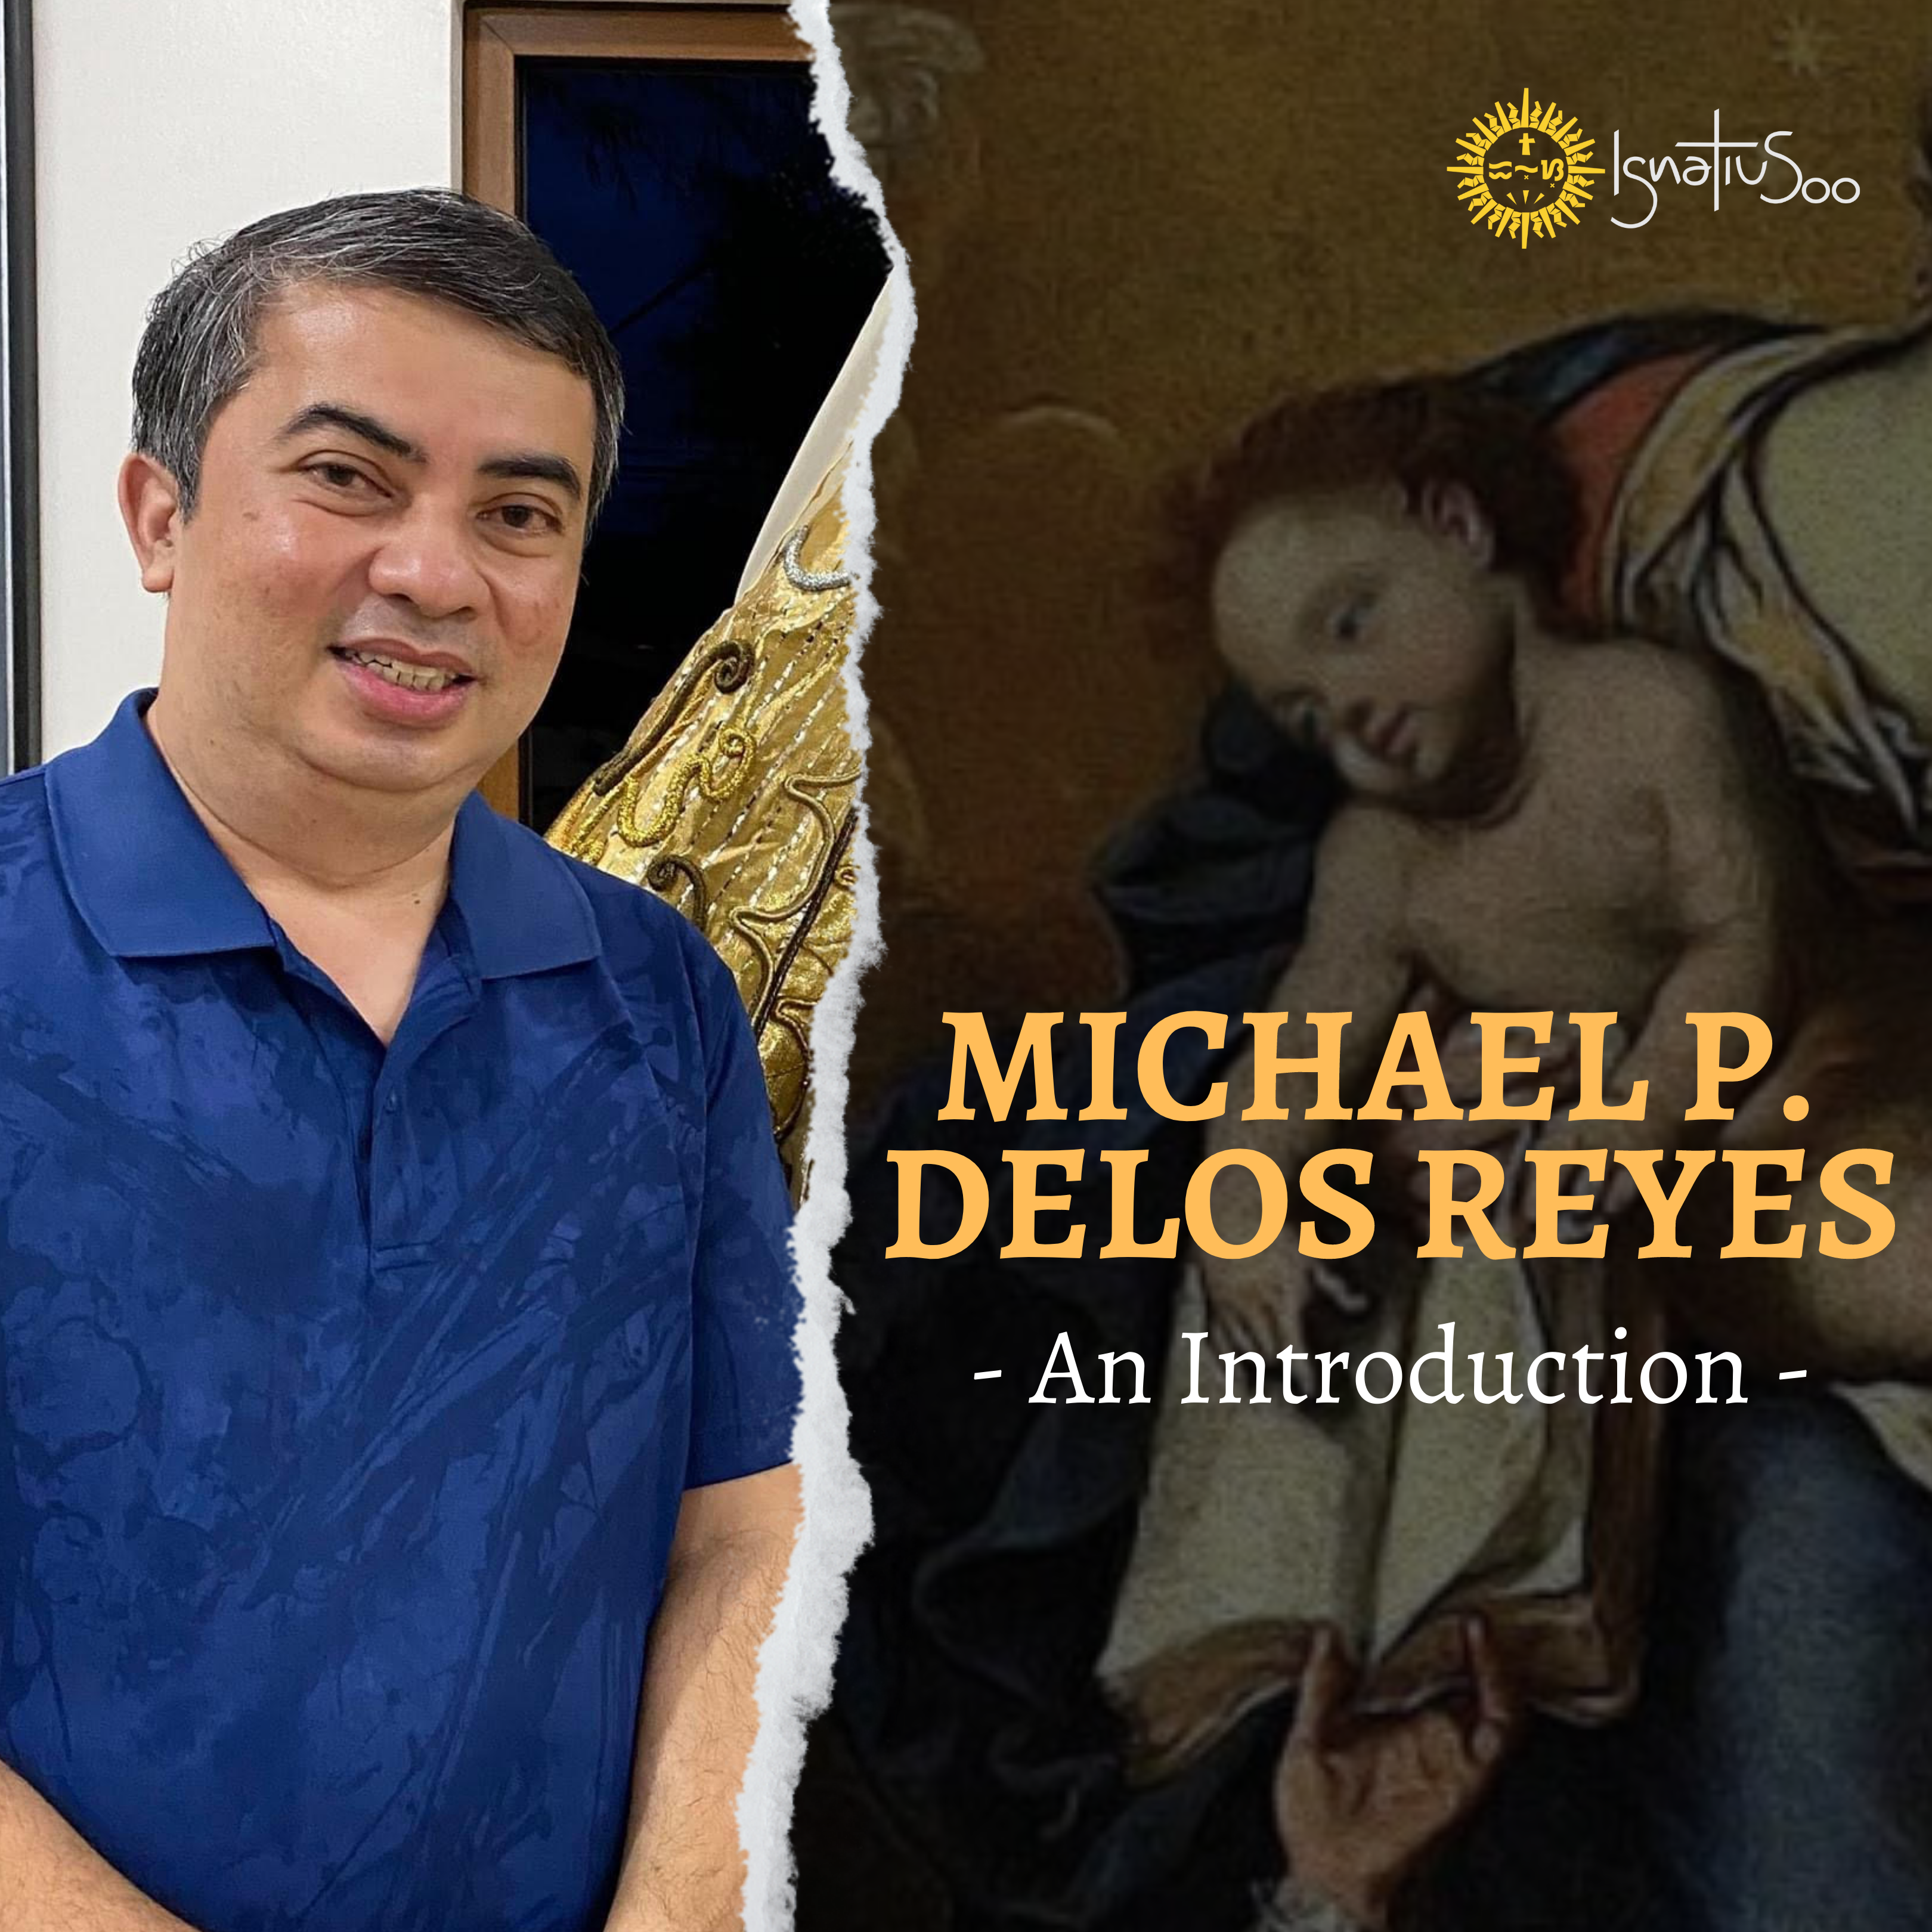 Radyo Katipunan Ignatian Year talk features “Place Me with Your Son’s” Michael Delos Reyes